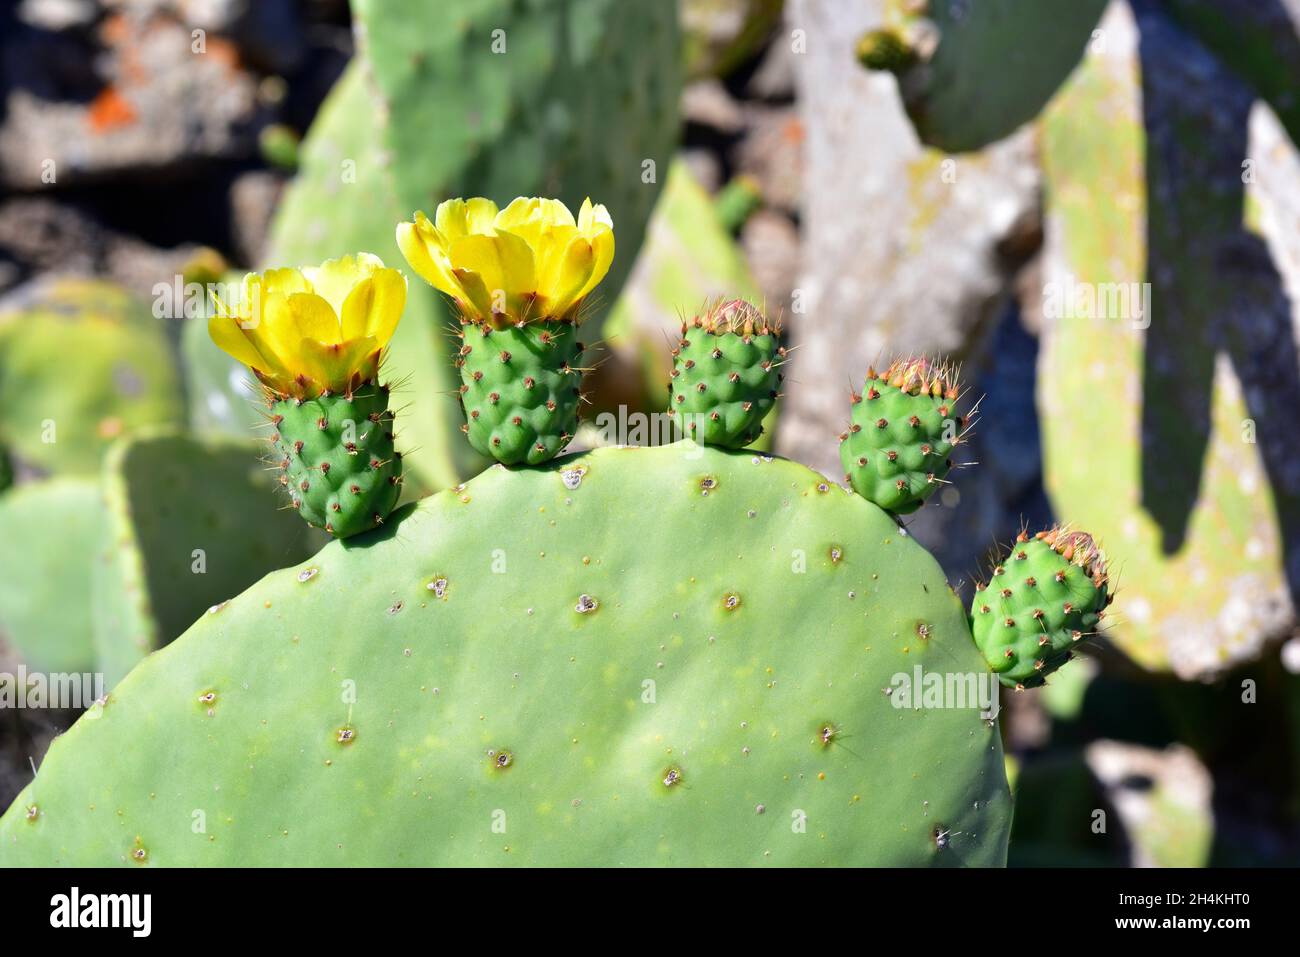 Indian fig opuntia or Barbary fig (Opuntia ficus-indica) is a cactus native to Mexico and naturalized in other arid regions. Its fruits are edible. Stock Photo